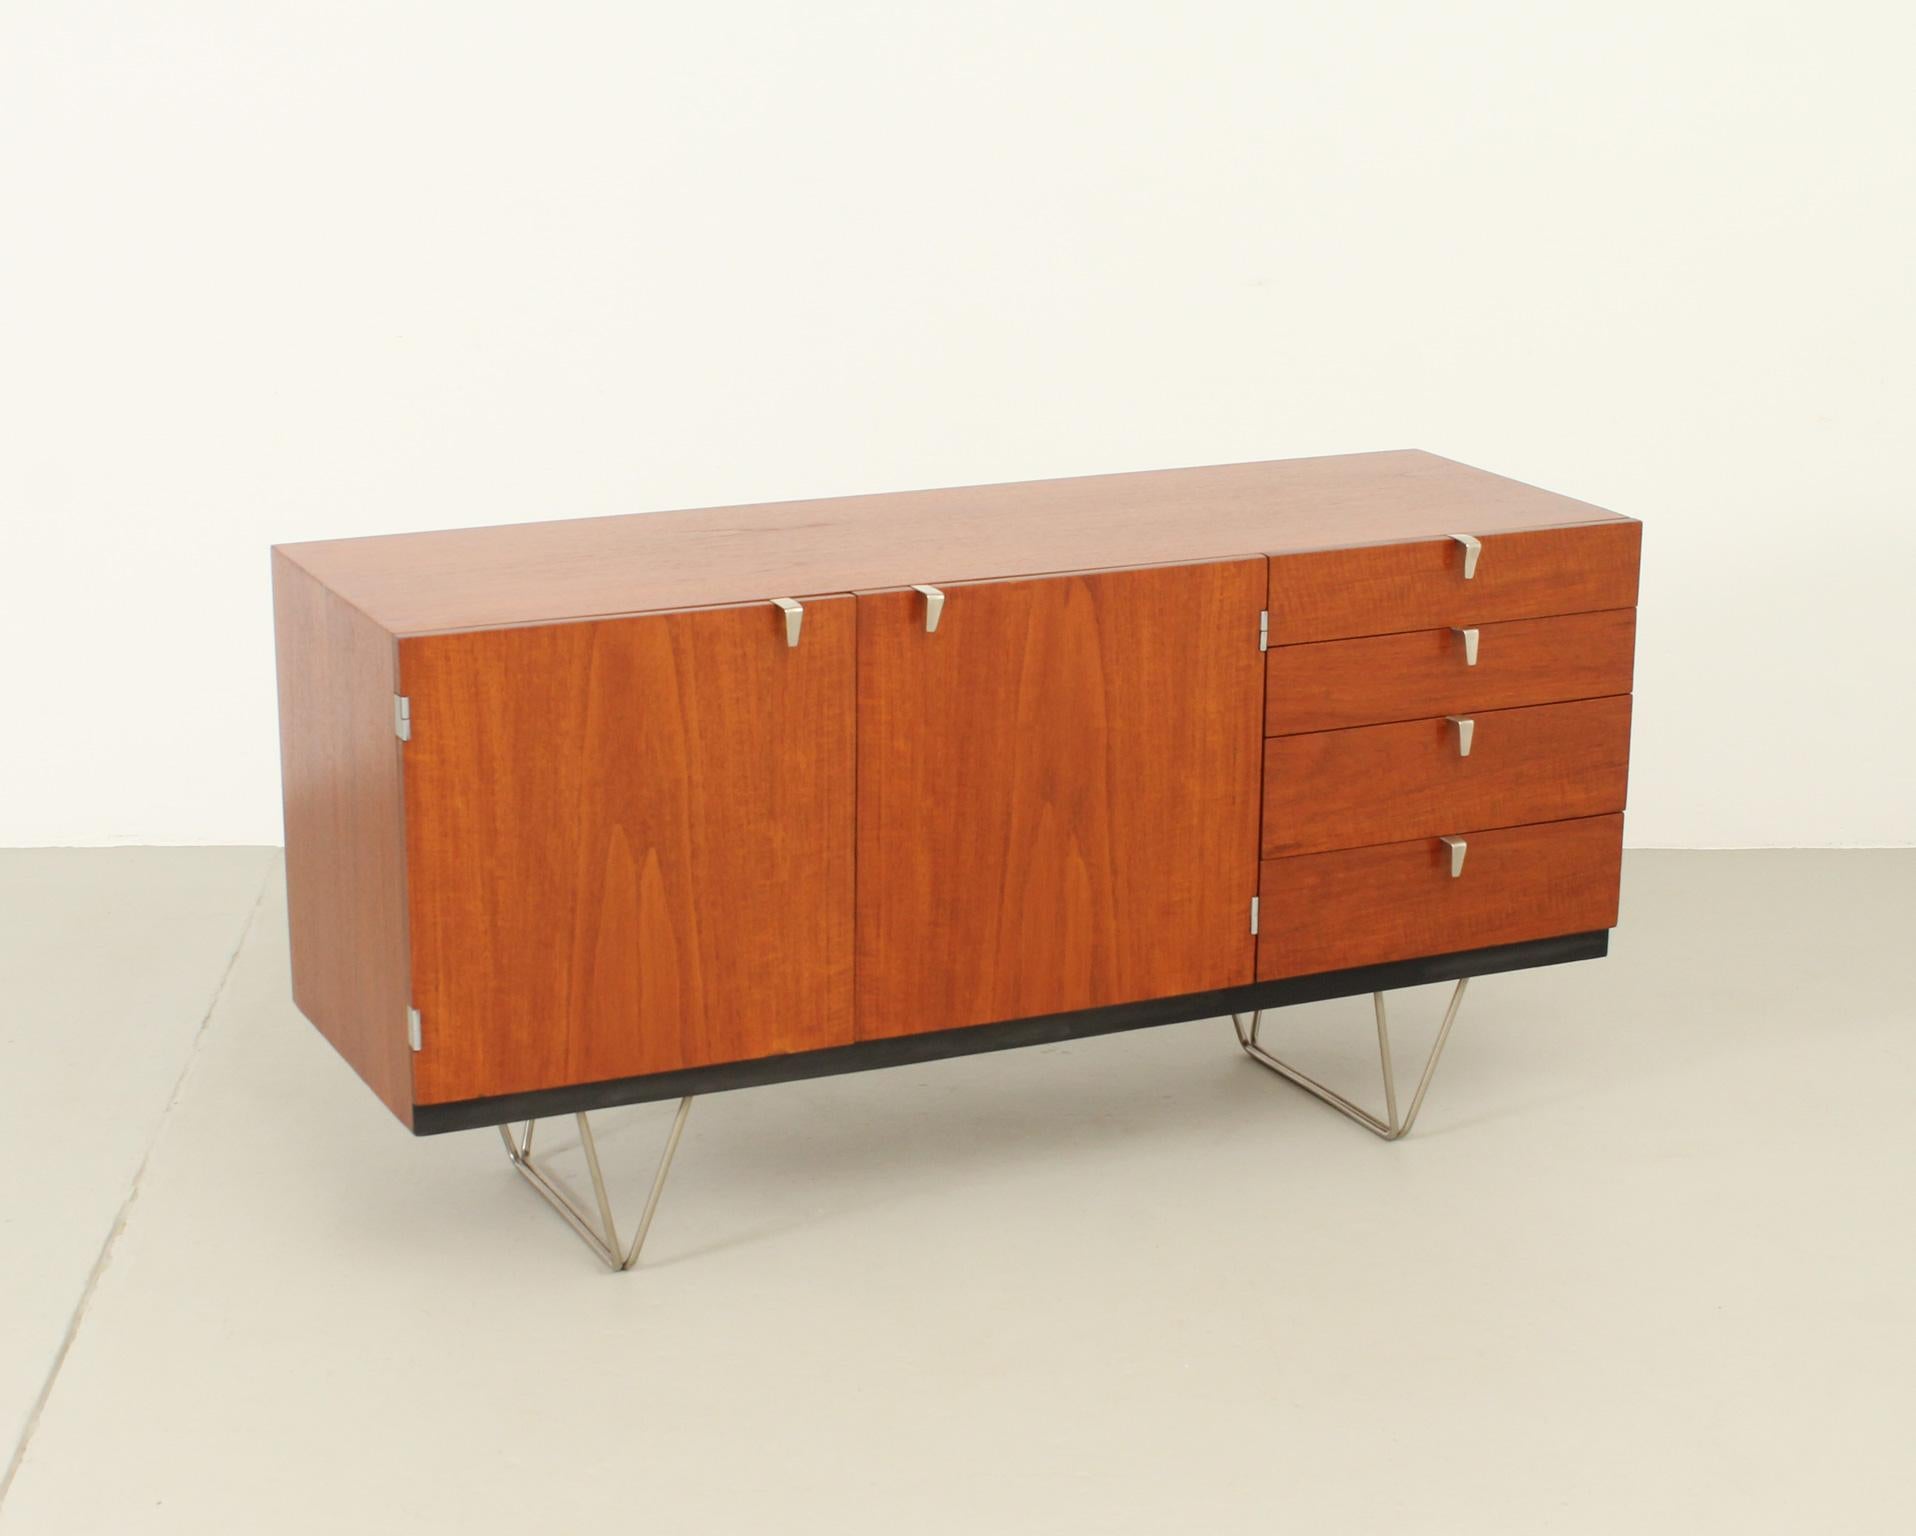 S Range Sideboard by John and Sylvia Reid for Stag Furniture, UK, 1959 For Sale 3